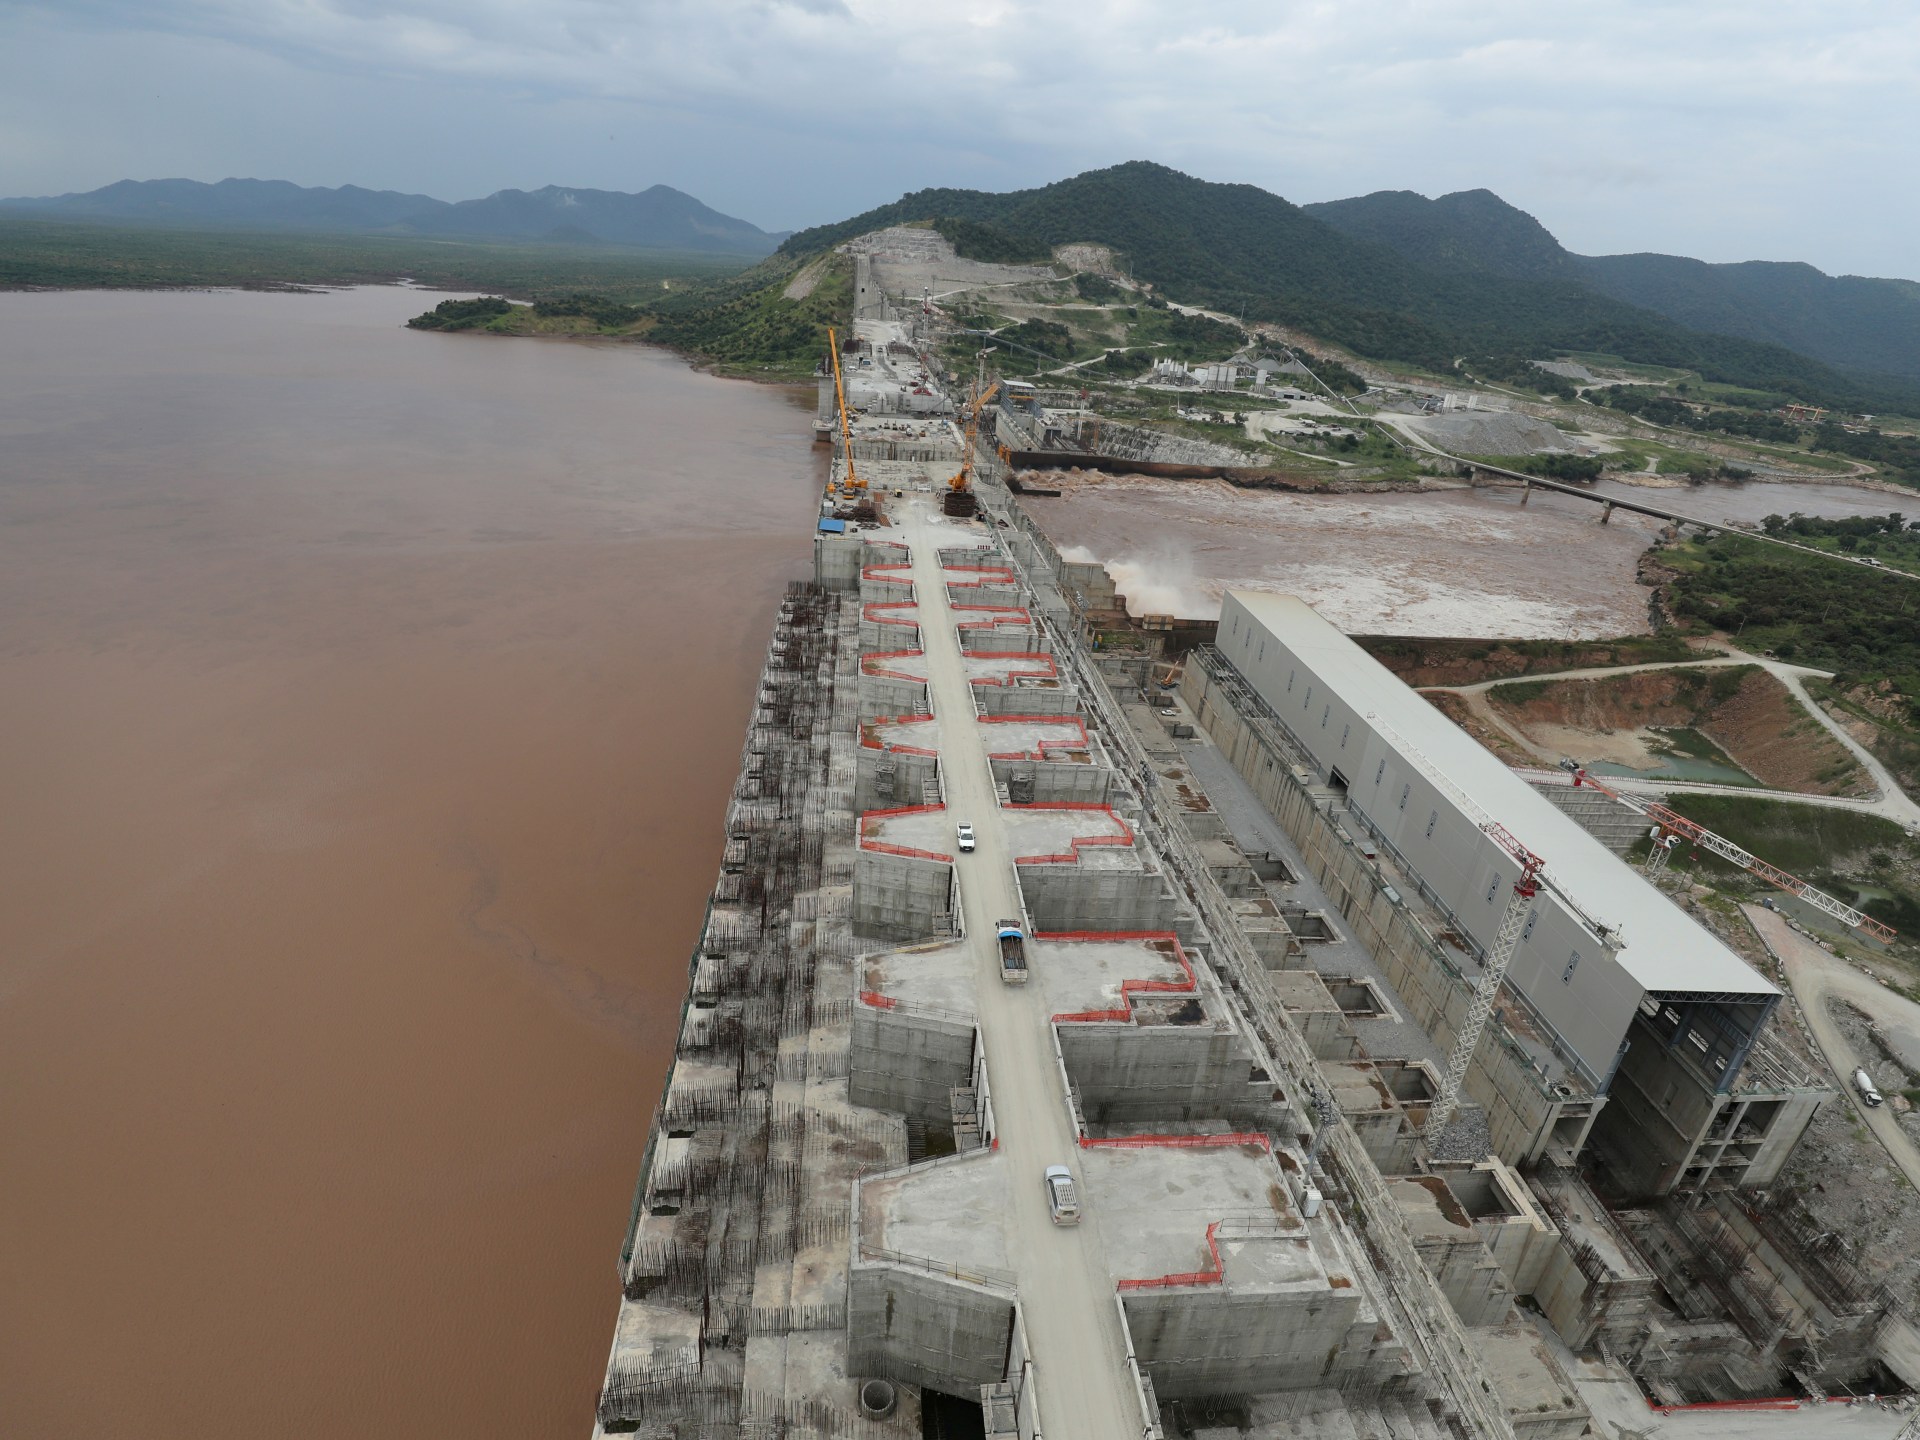 Filling of Grand Renaissance Dam on the Nile complete, Ethiopia says